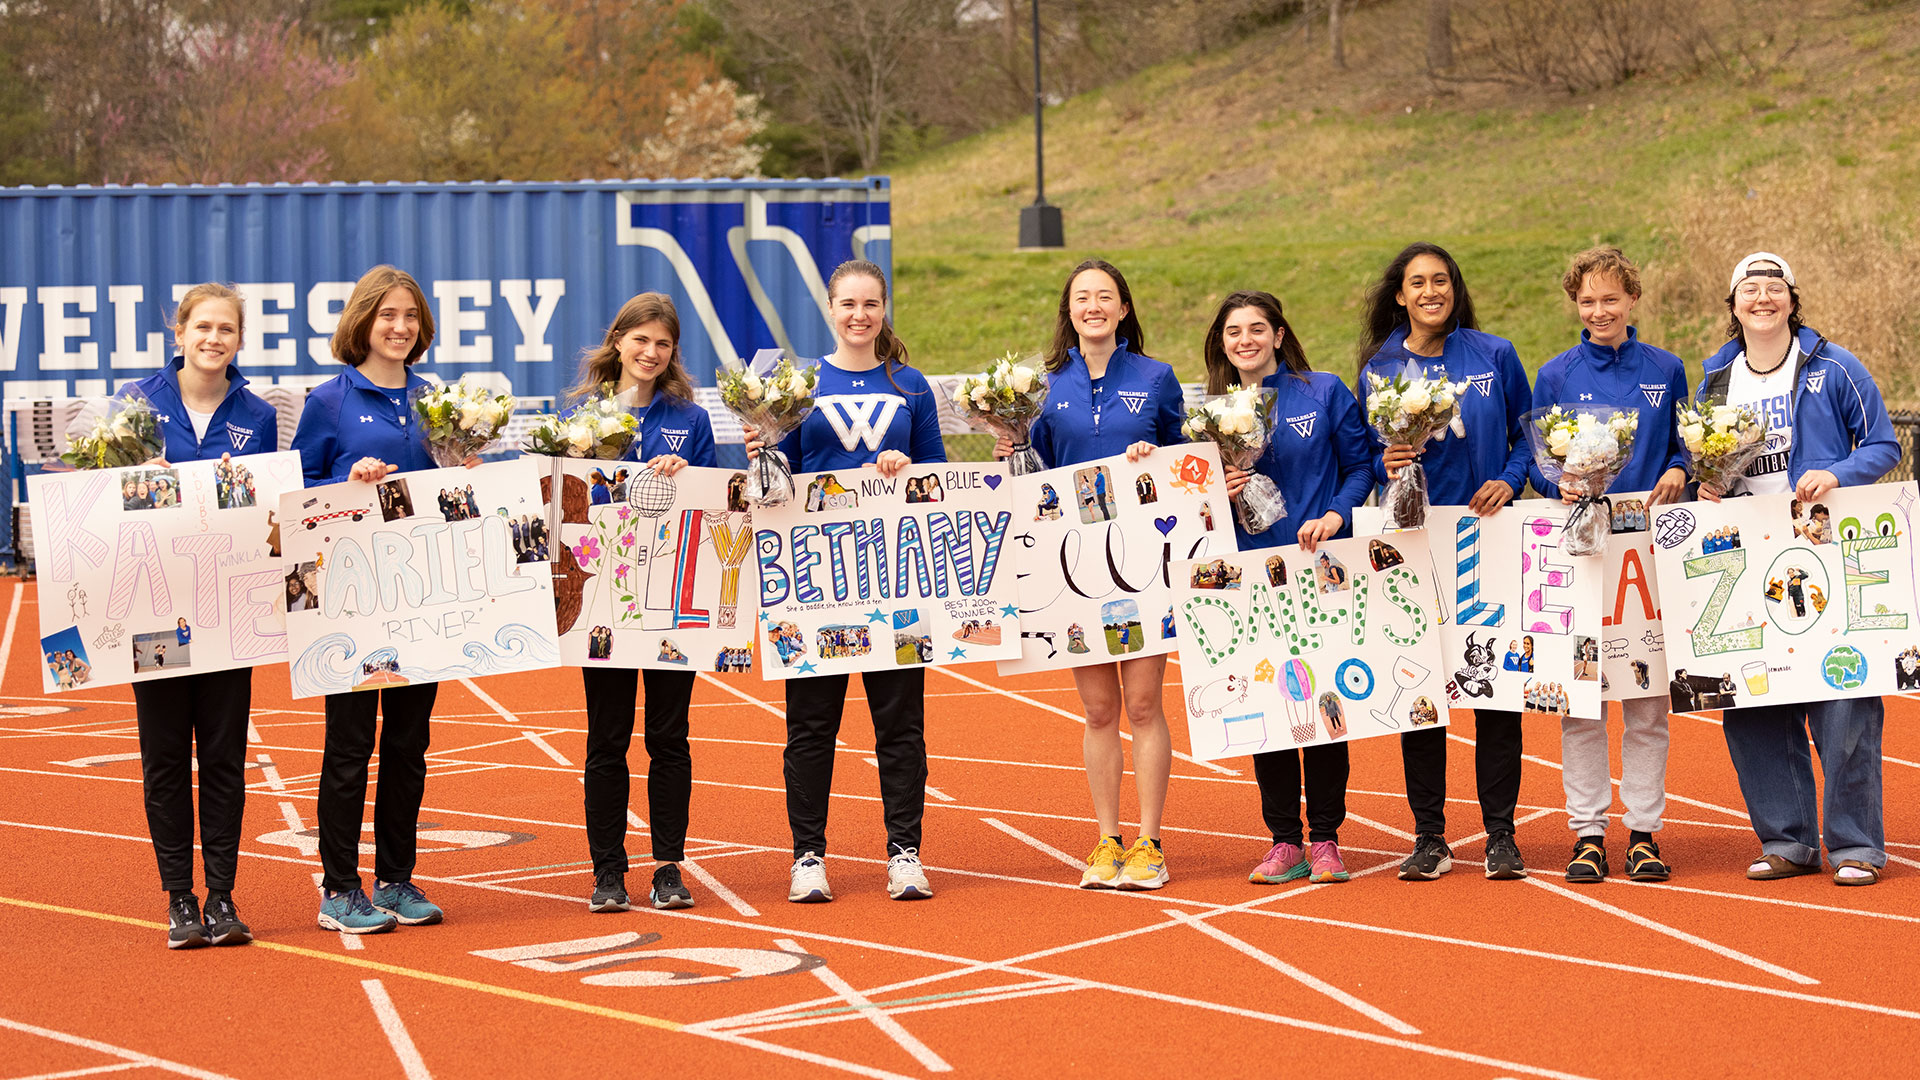 Wellesley track & field celebrated senior day on Saturday.